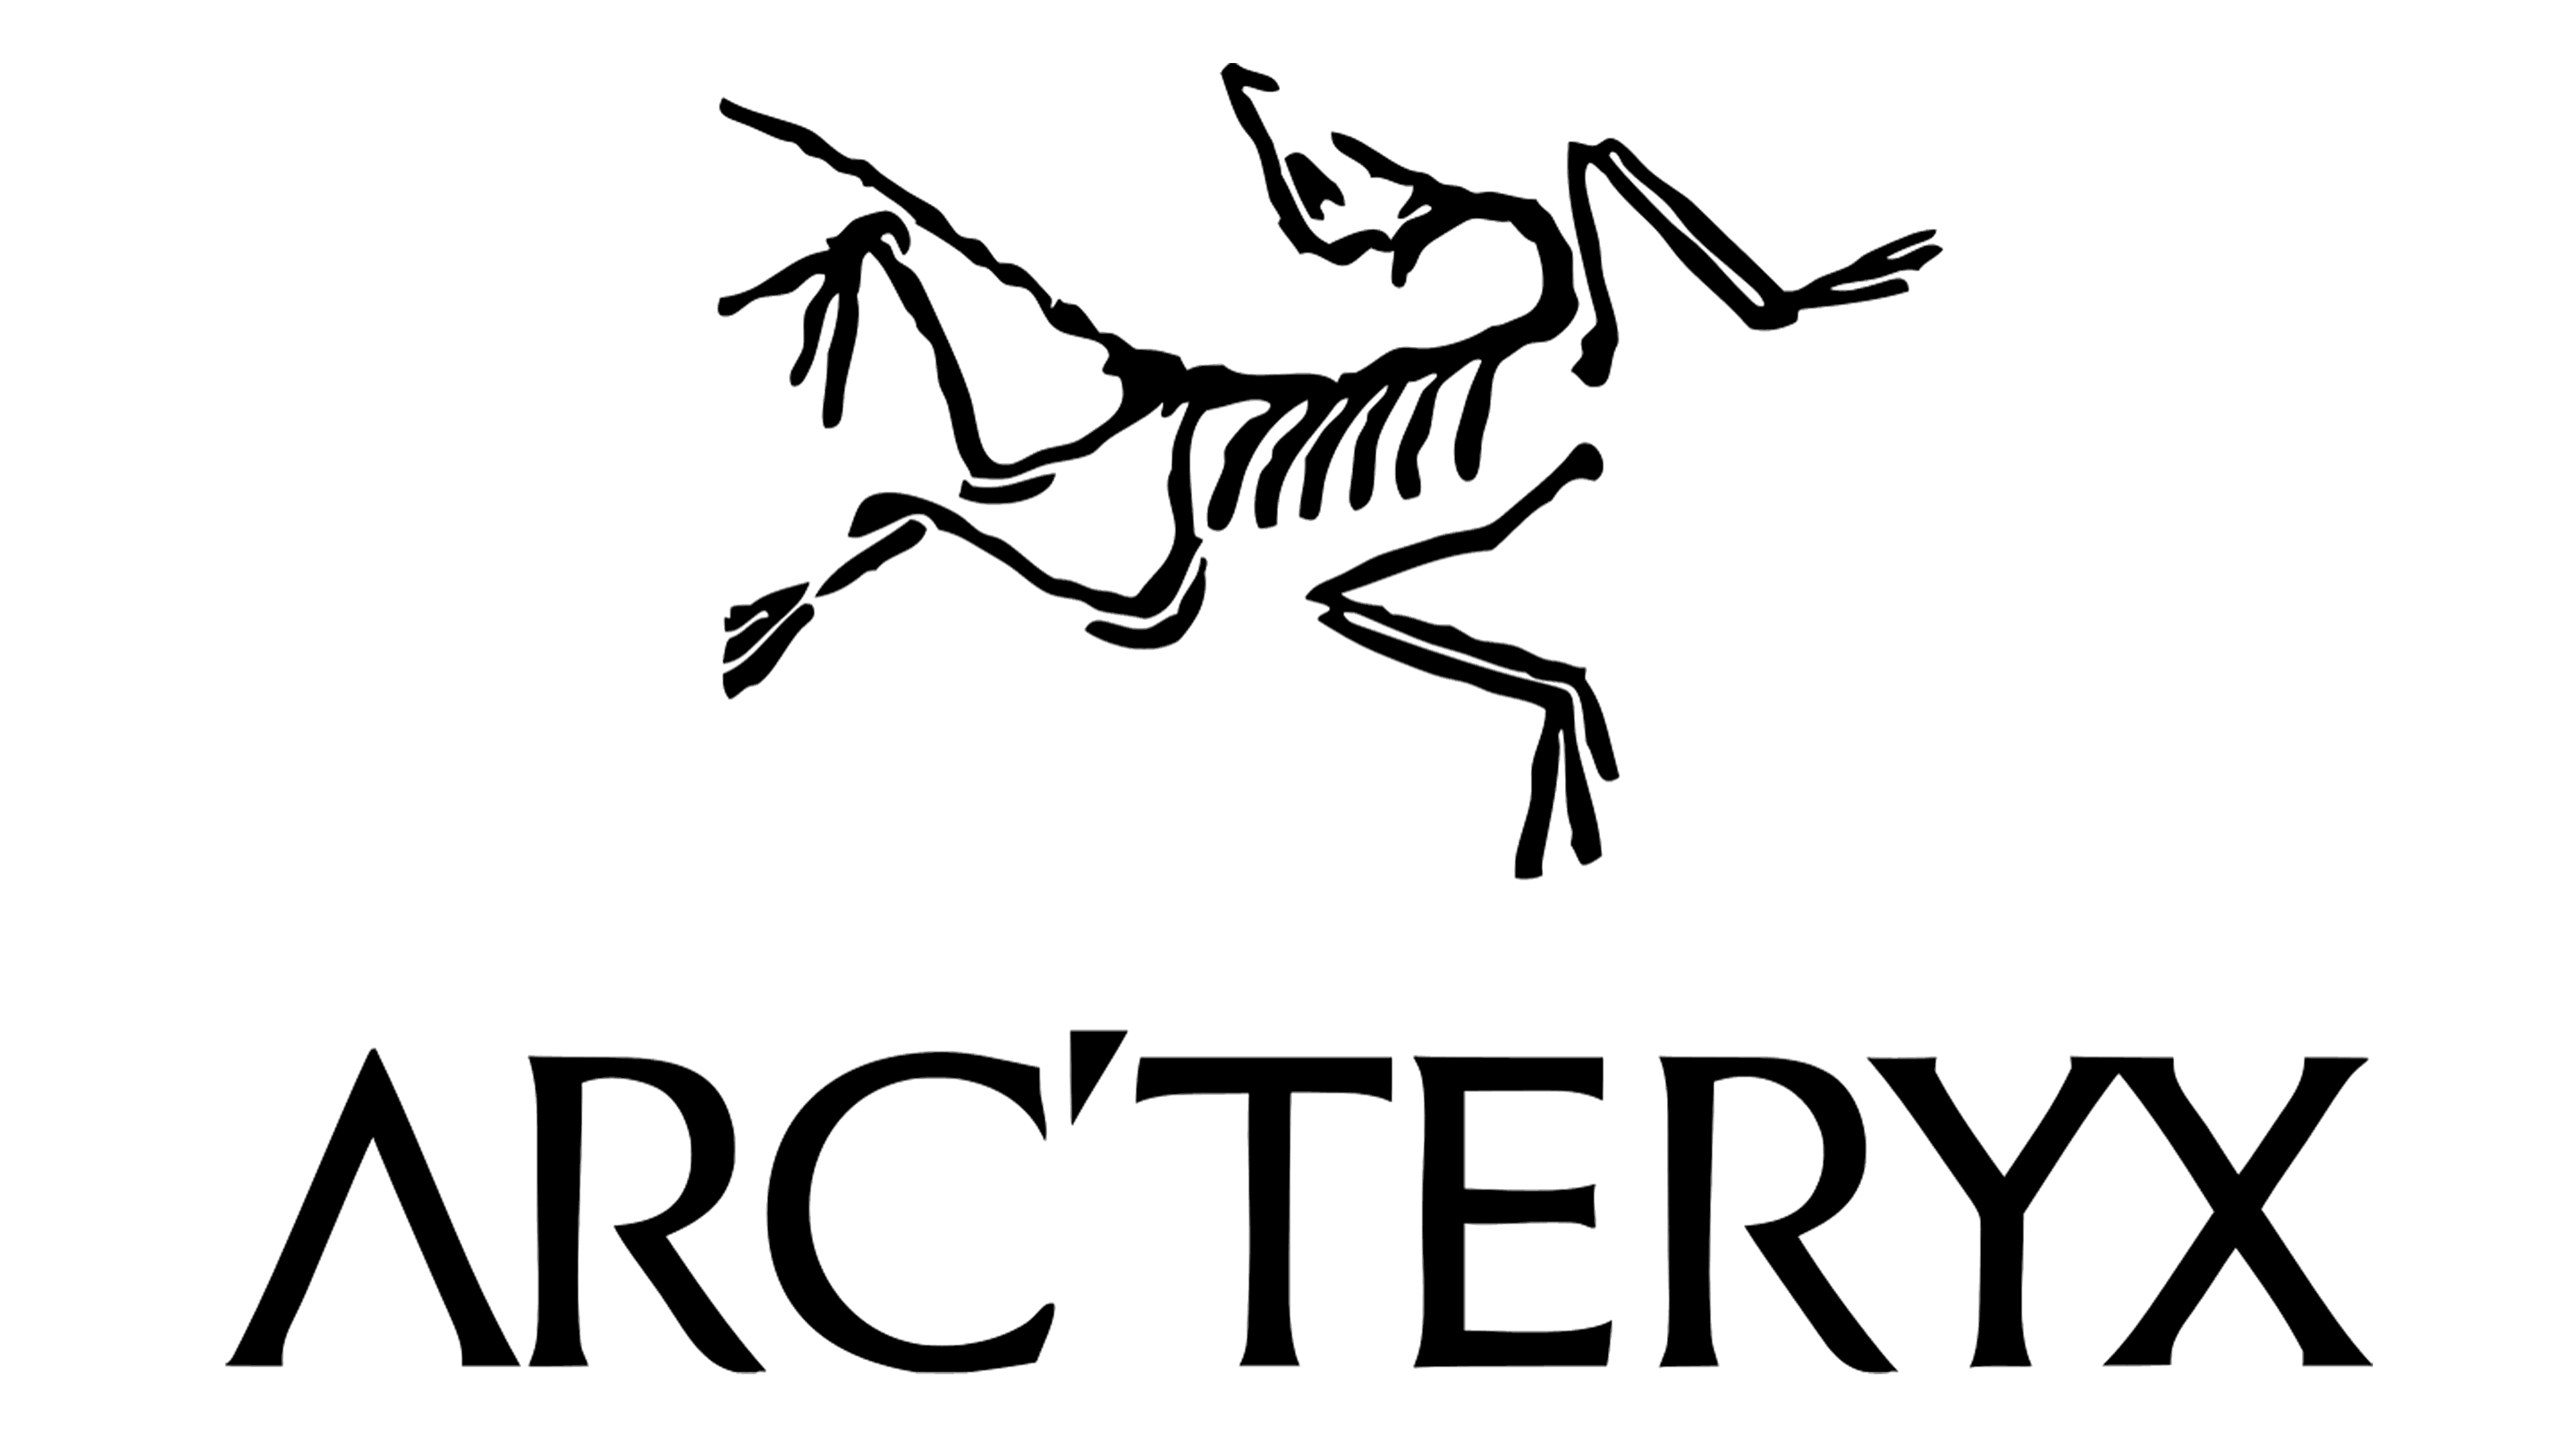 Arc'teryx logo and sign, new logo meaning and history, PNG, SVG